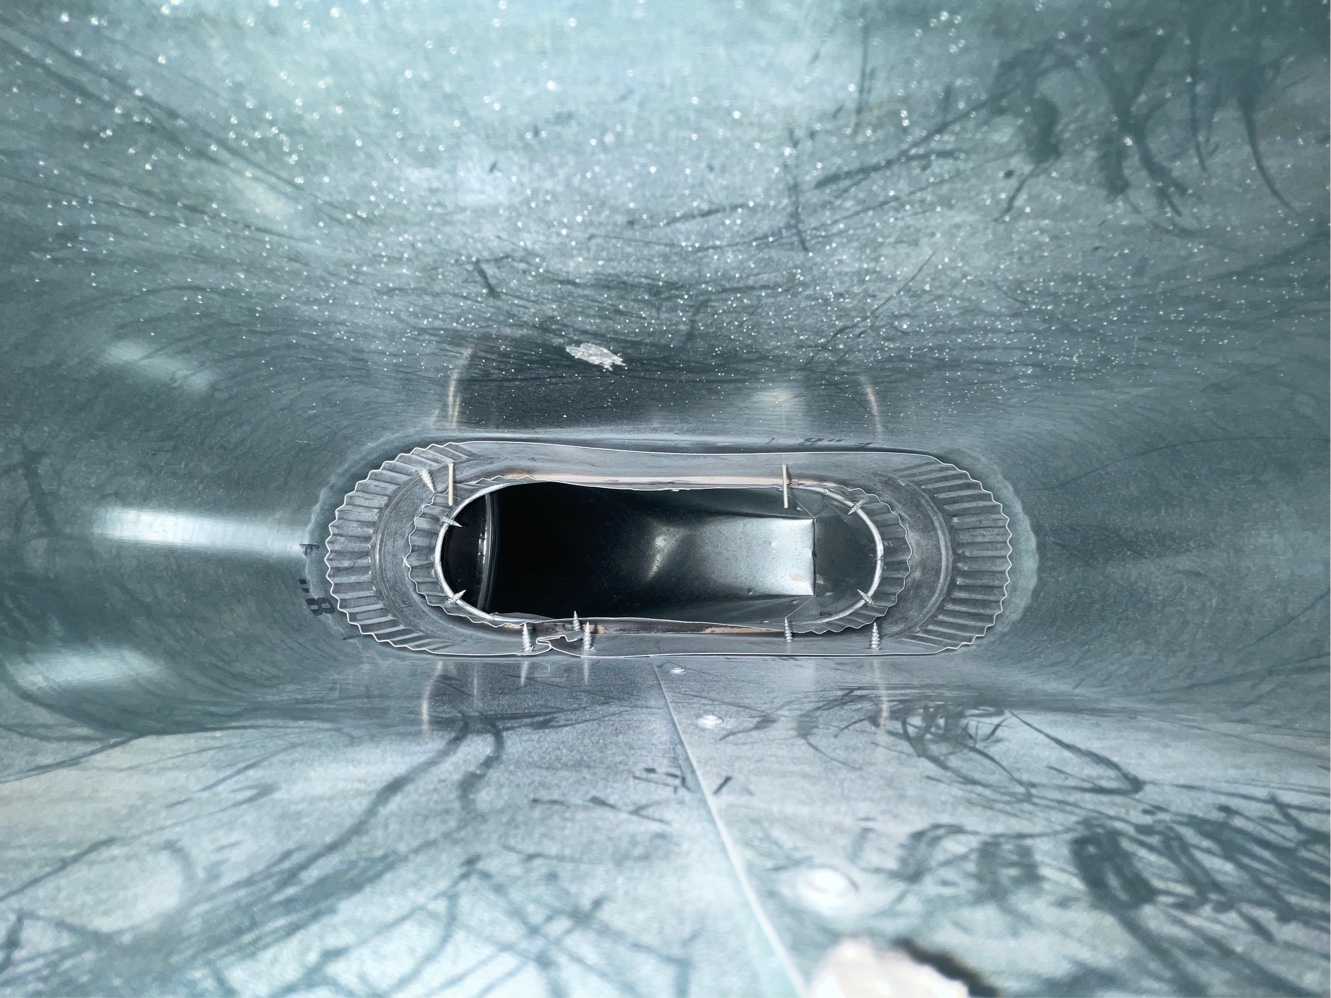 AIR DUCT CLEANING PRICING IN COLUMBUS, OHIO | After Clean Air Duct | Clean Extreme